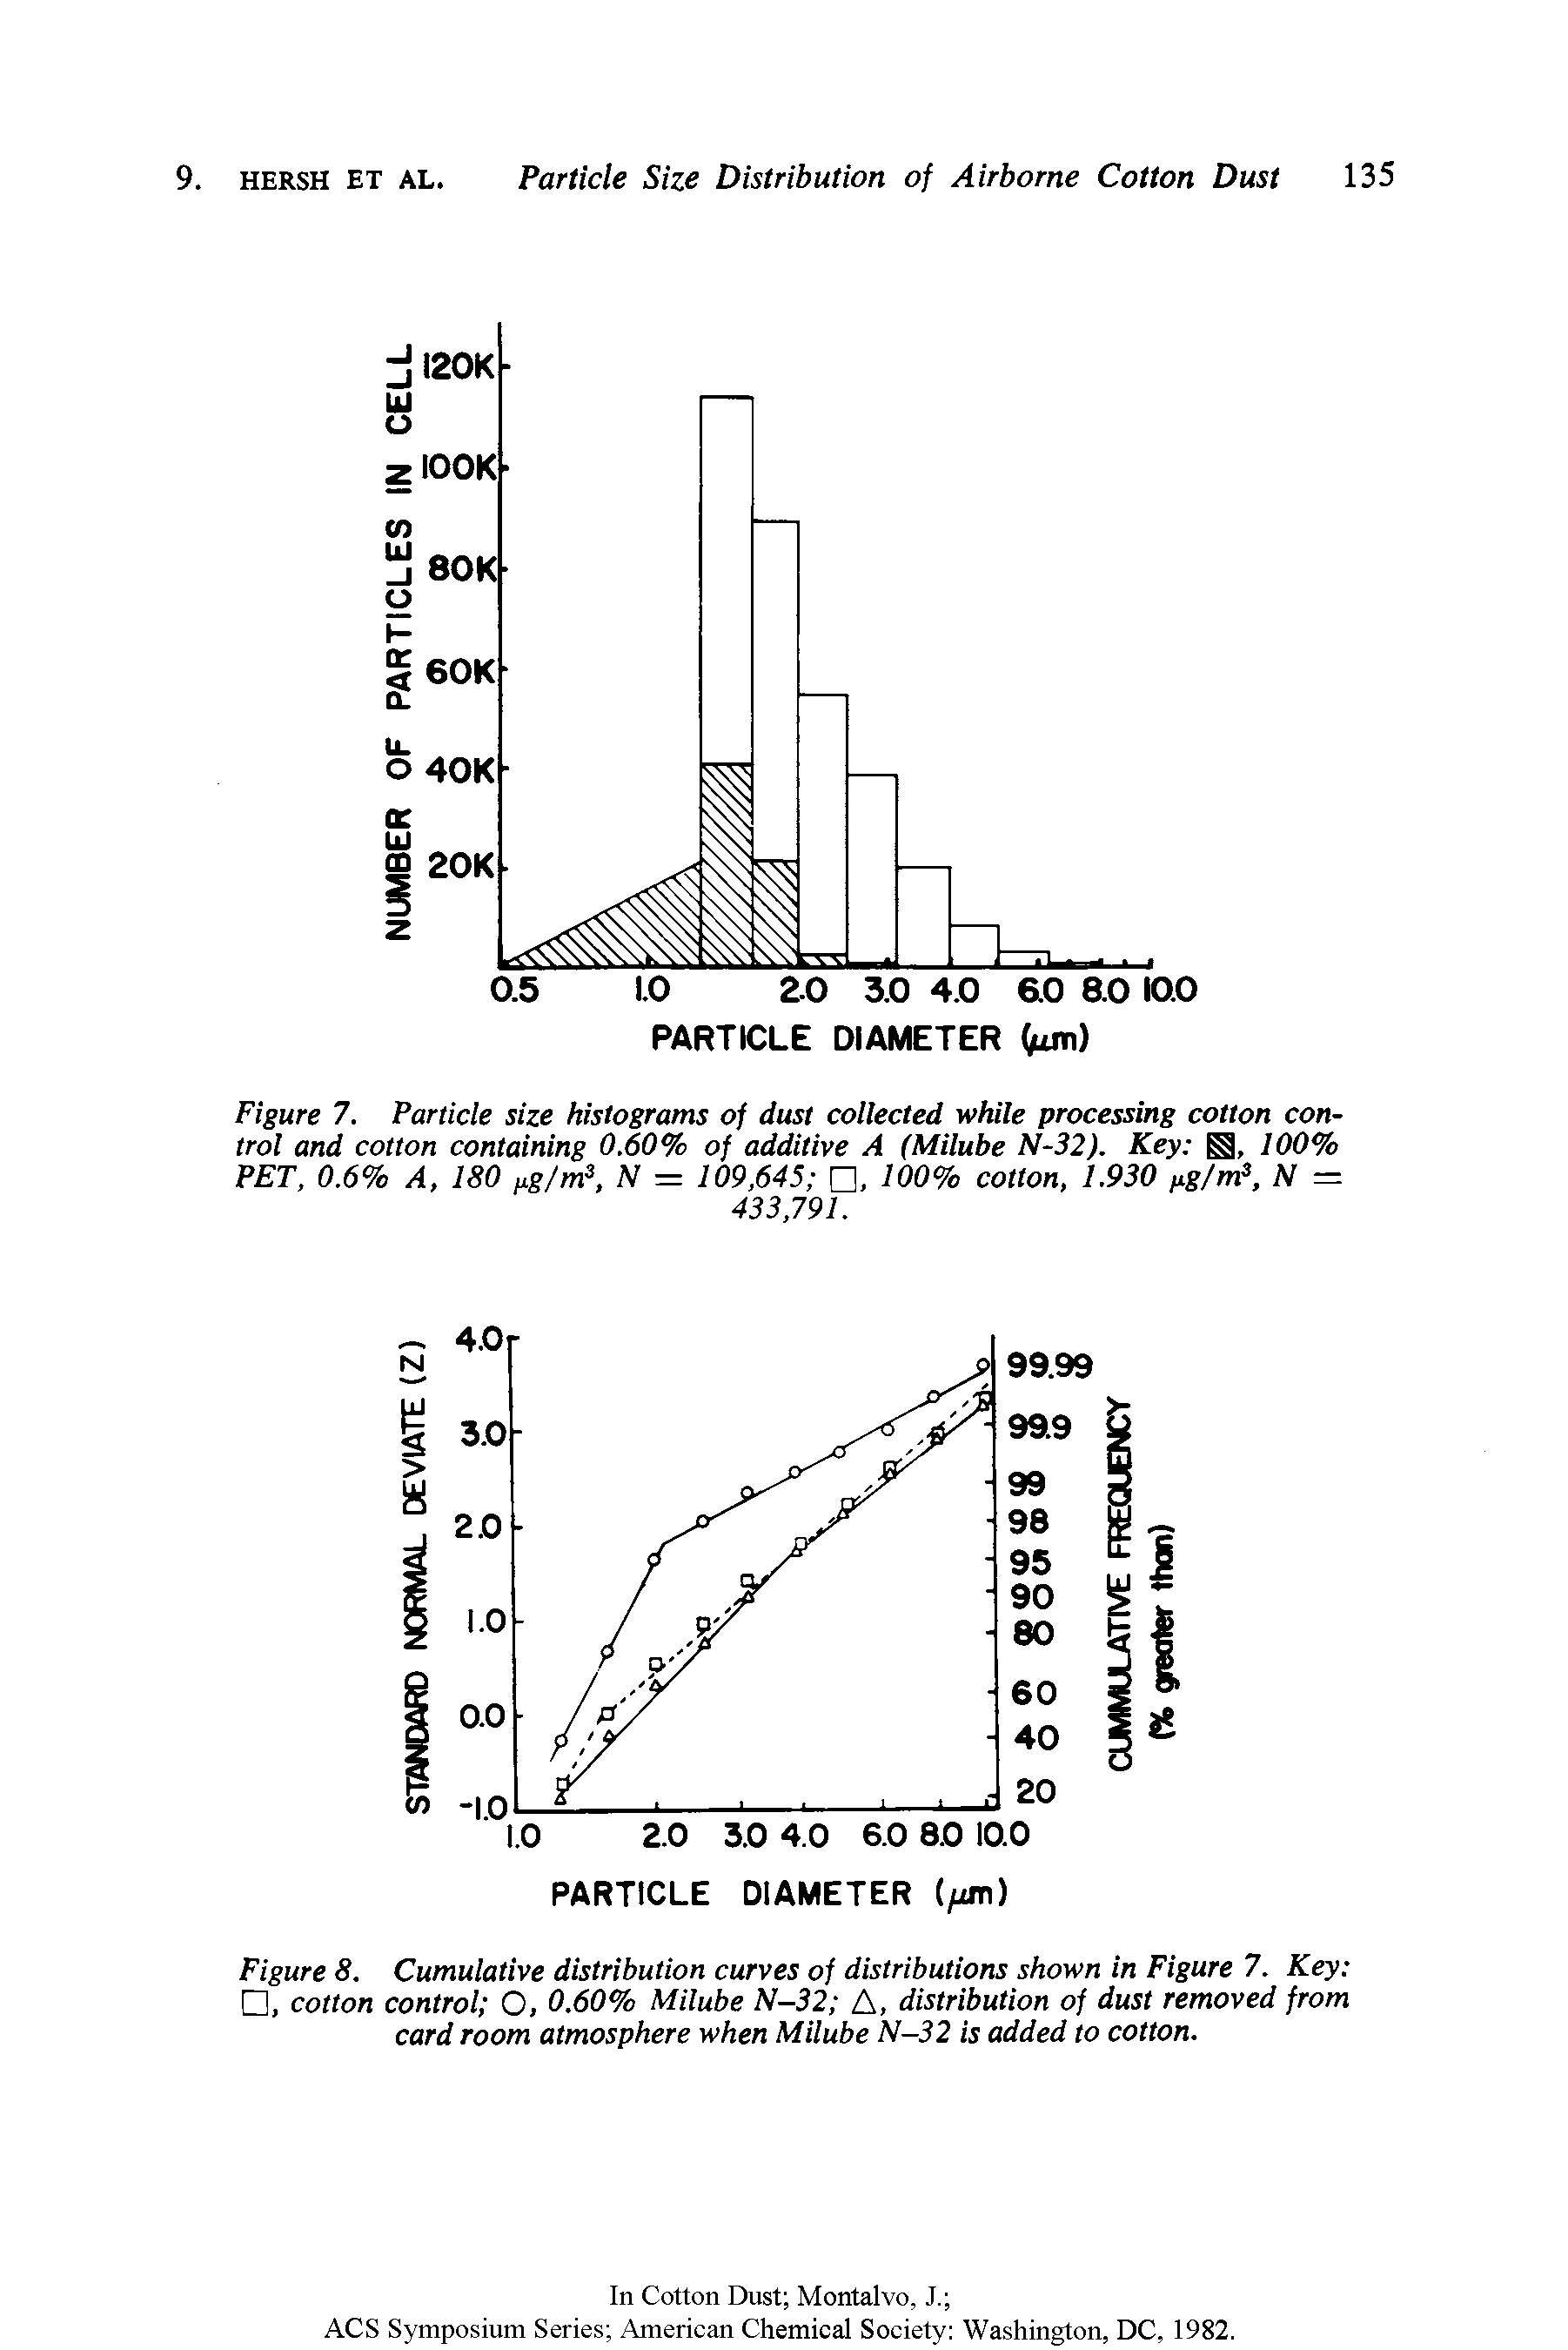 Figure 8. Cumulative distribution curves of distributions shown in Figure 7. Key , cotton control O, 0.60% Milube N-32 A, distribution of dust removed from card room atmosphere when Milube N-32 is added to cotton.